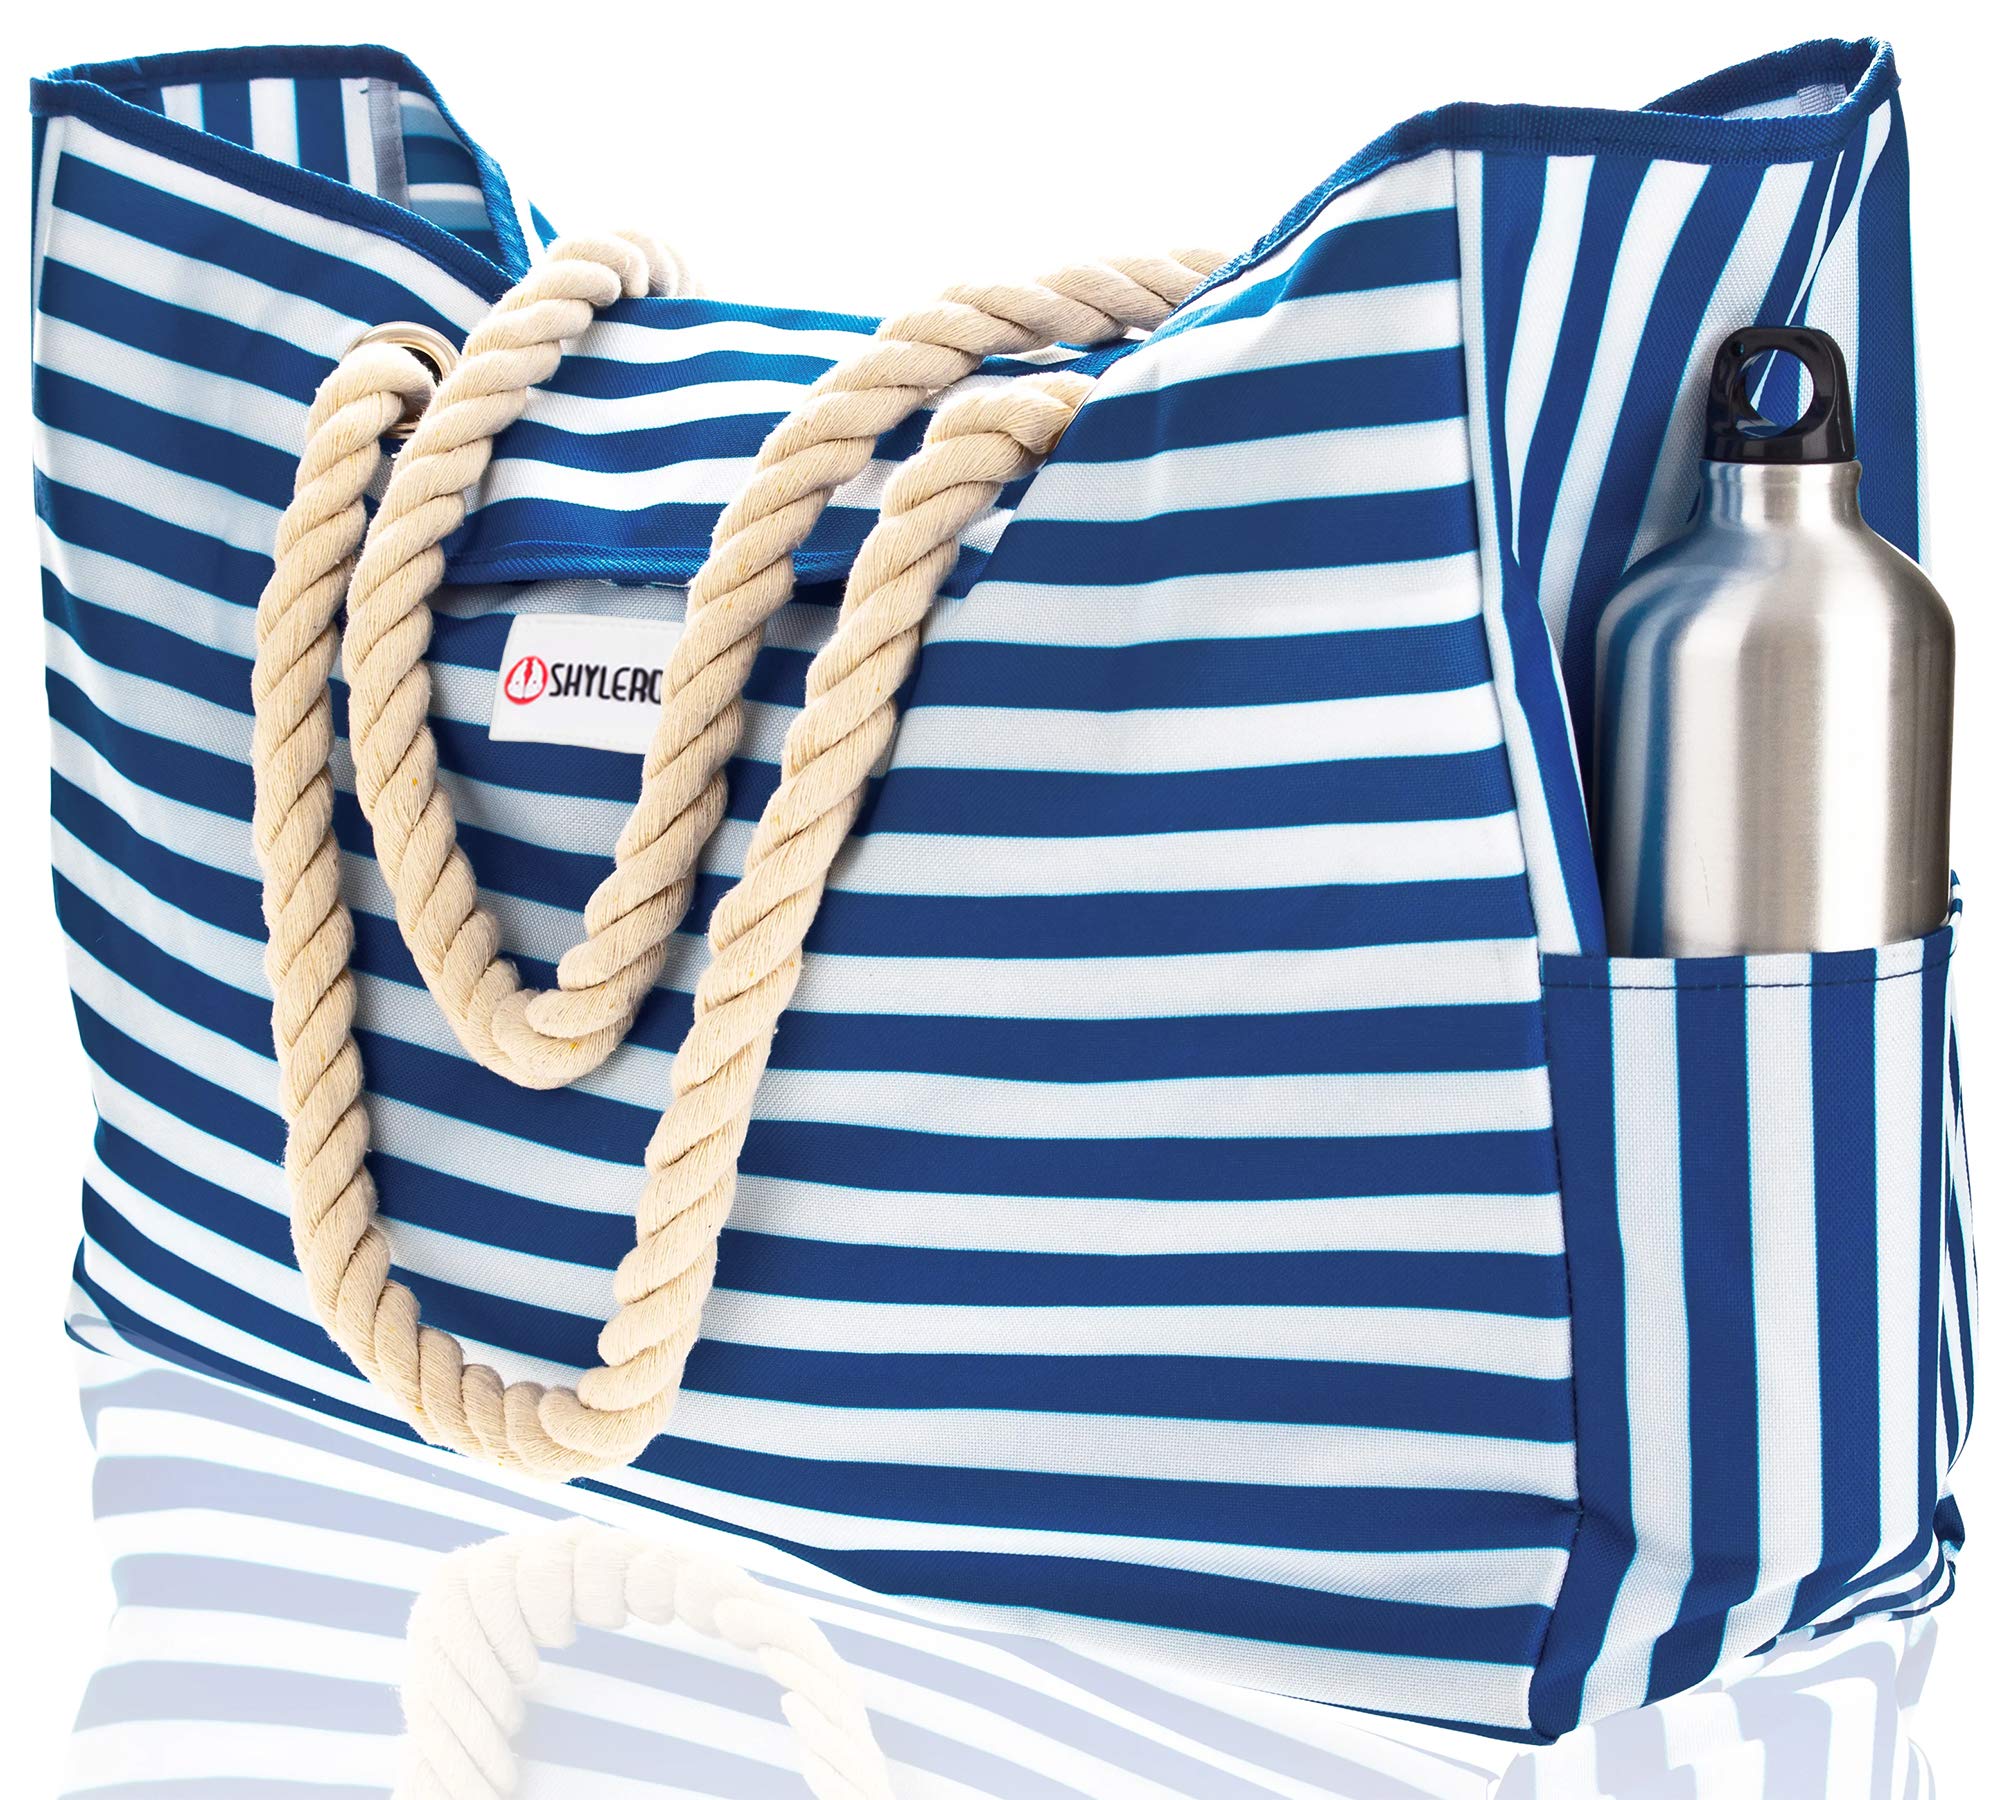 Beach Bag Nautical Marine Anchor And Waves Large Tote Pool Bags Zipper  Sandproof Cotton Rope Handles Side Pockets For Travel,Gym, Swim